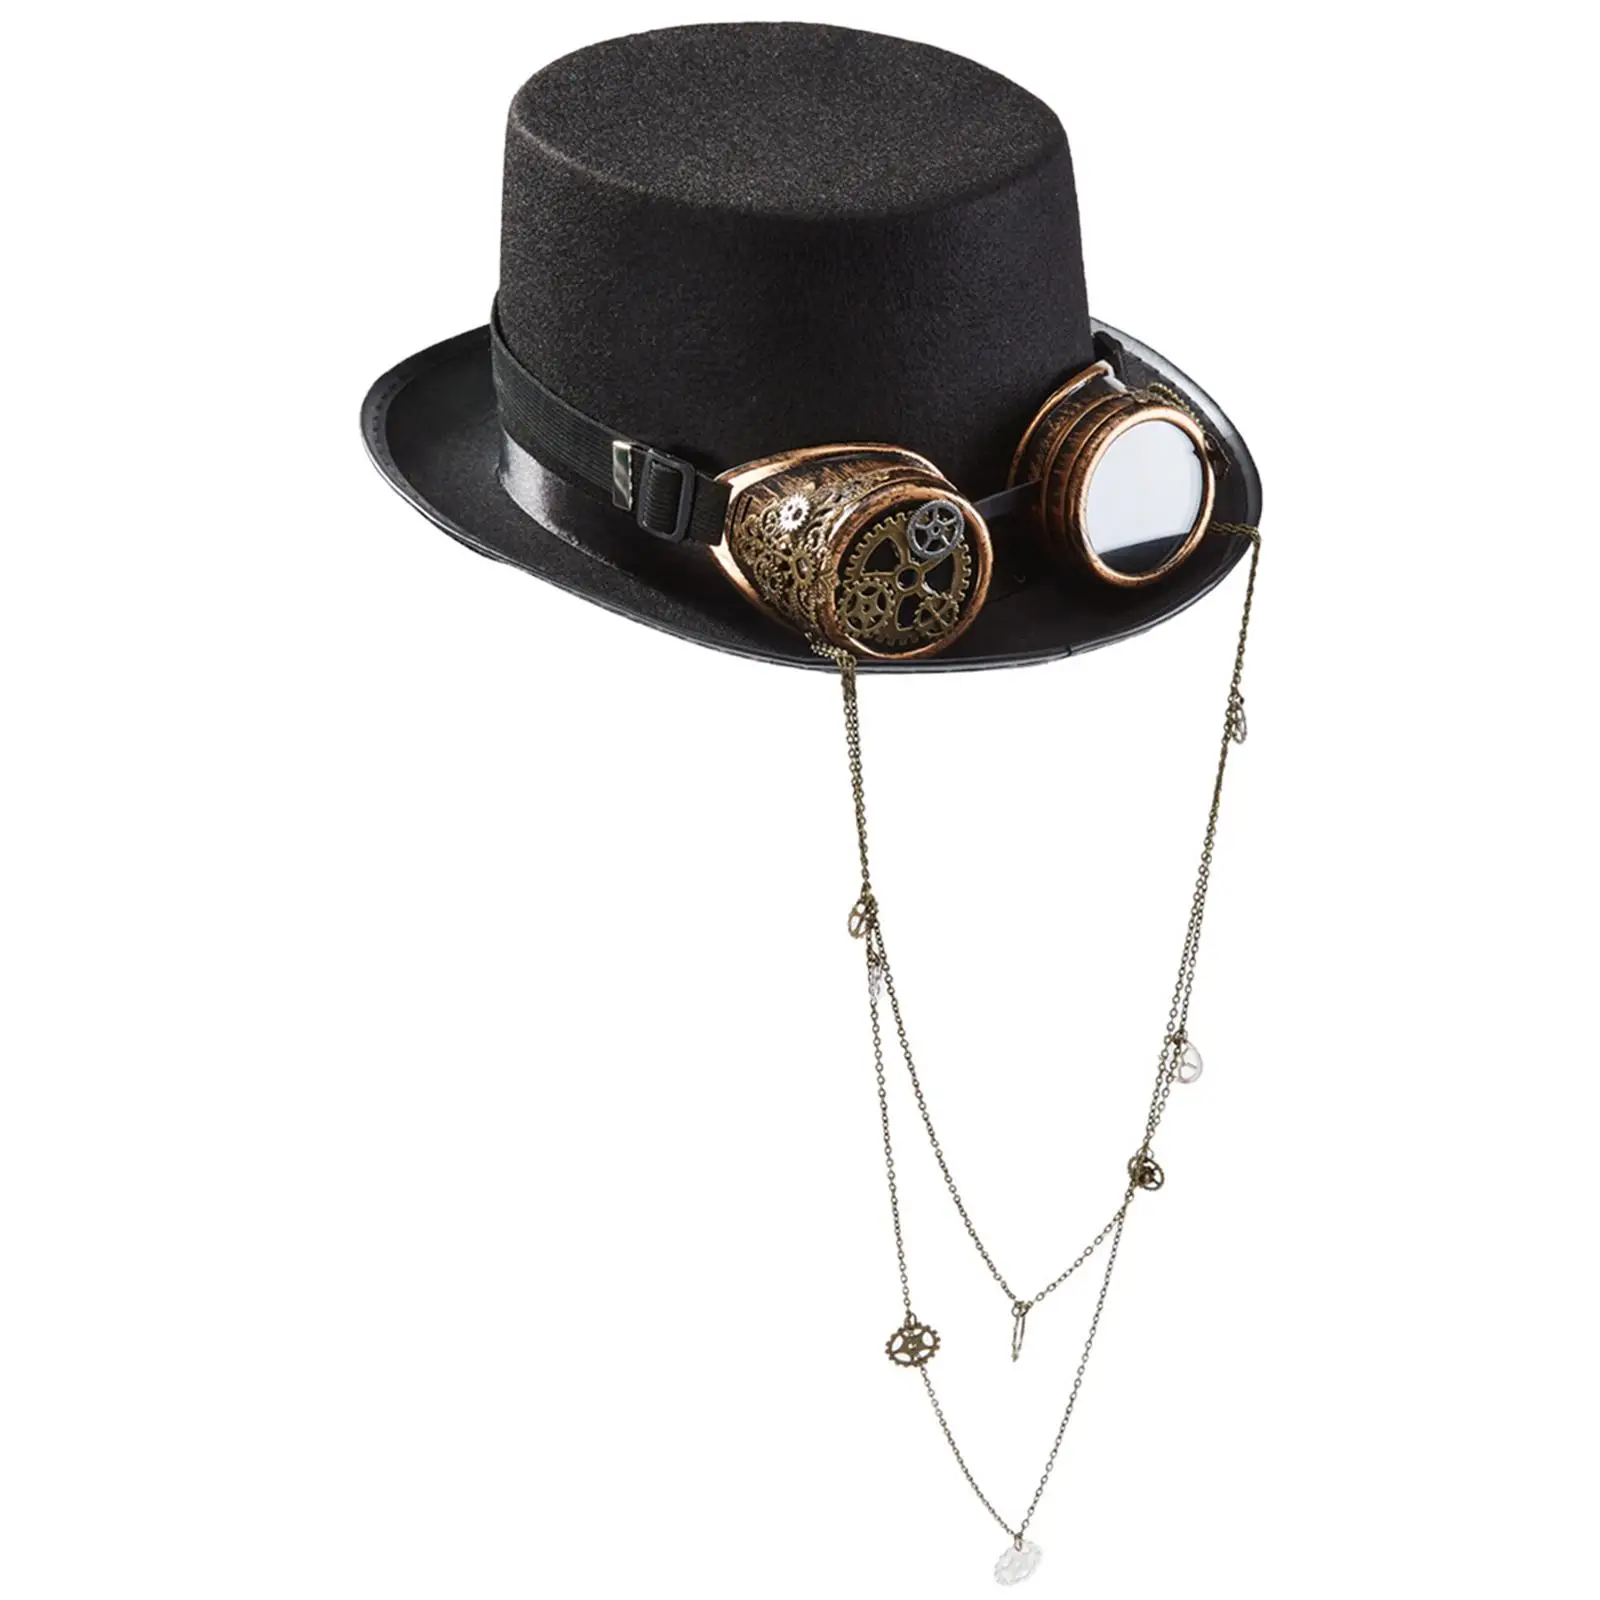 Gothic Steampunk Hat with Goggles Long Chain Black Top Hat Accessories Black